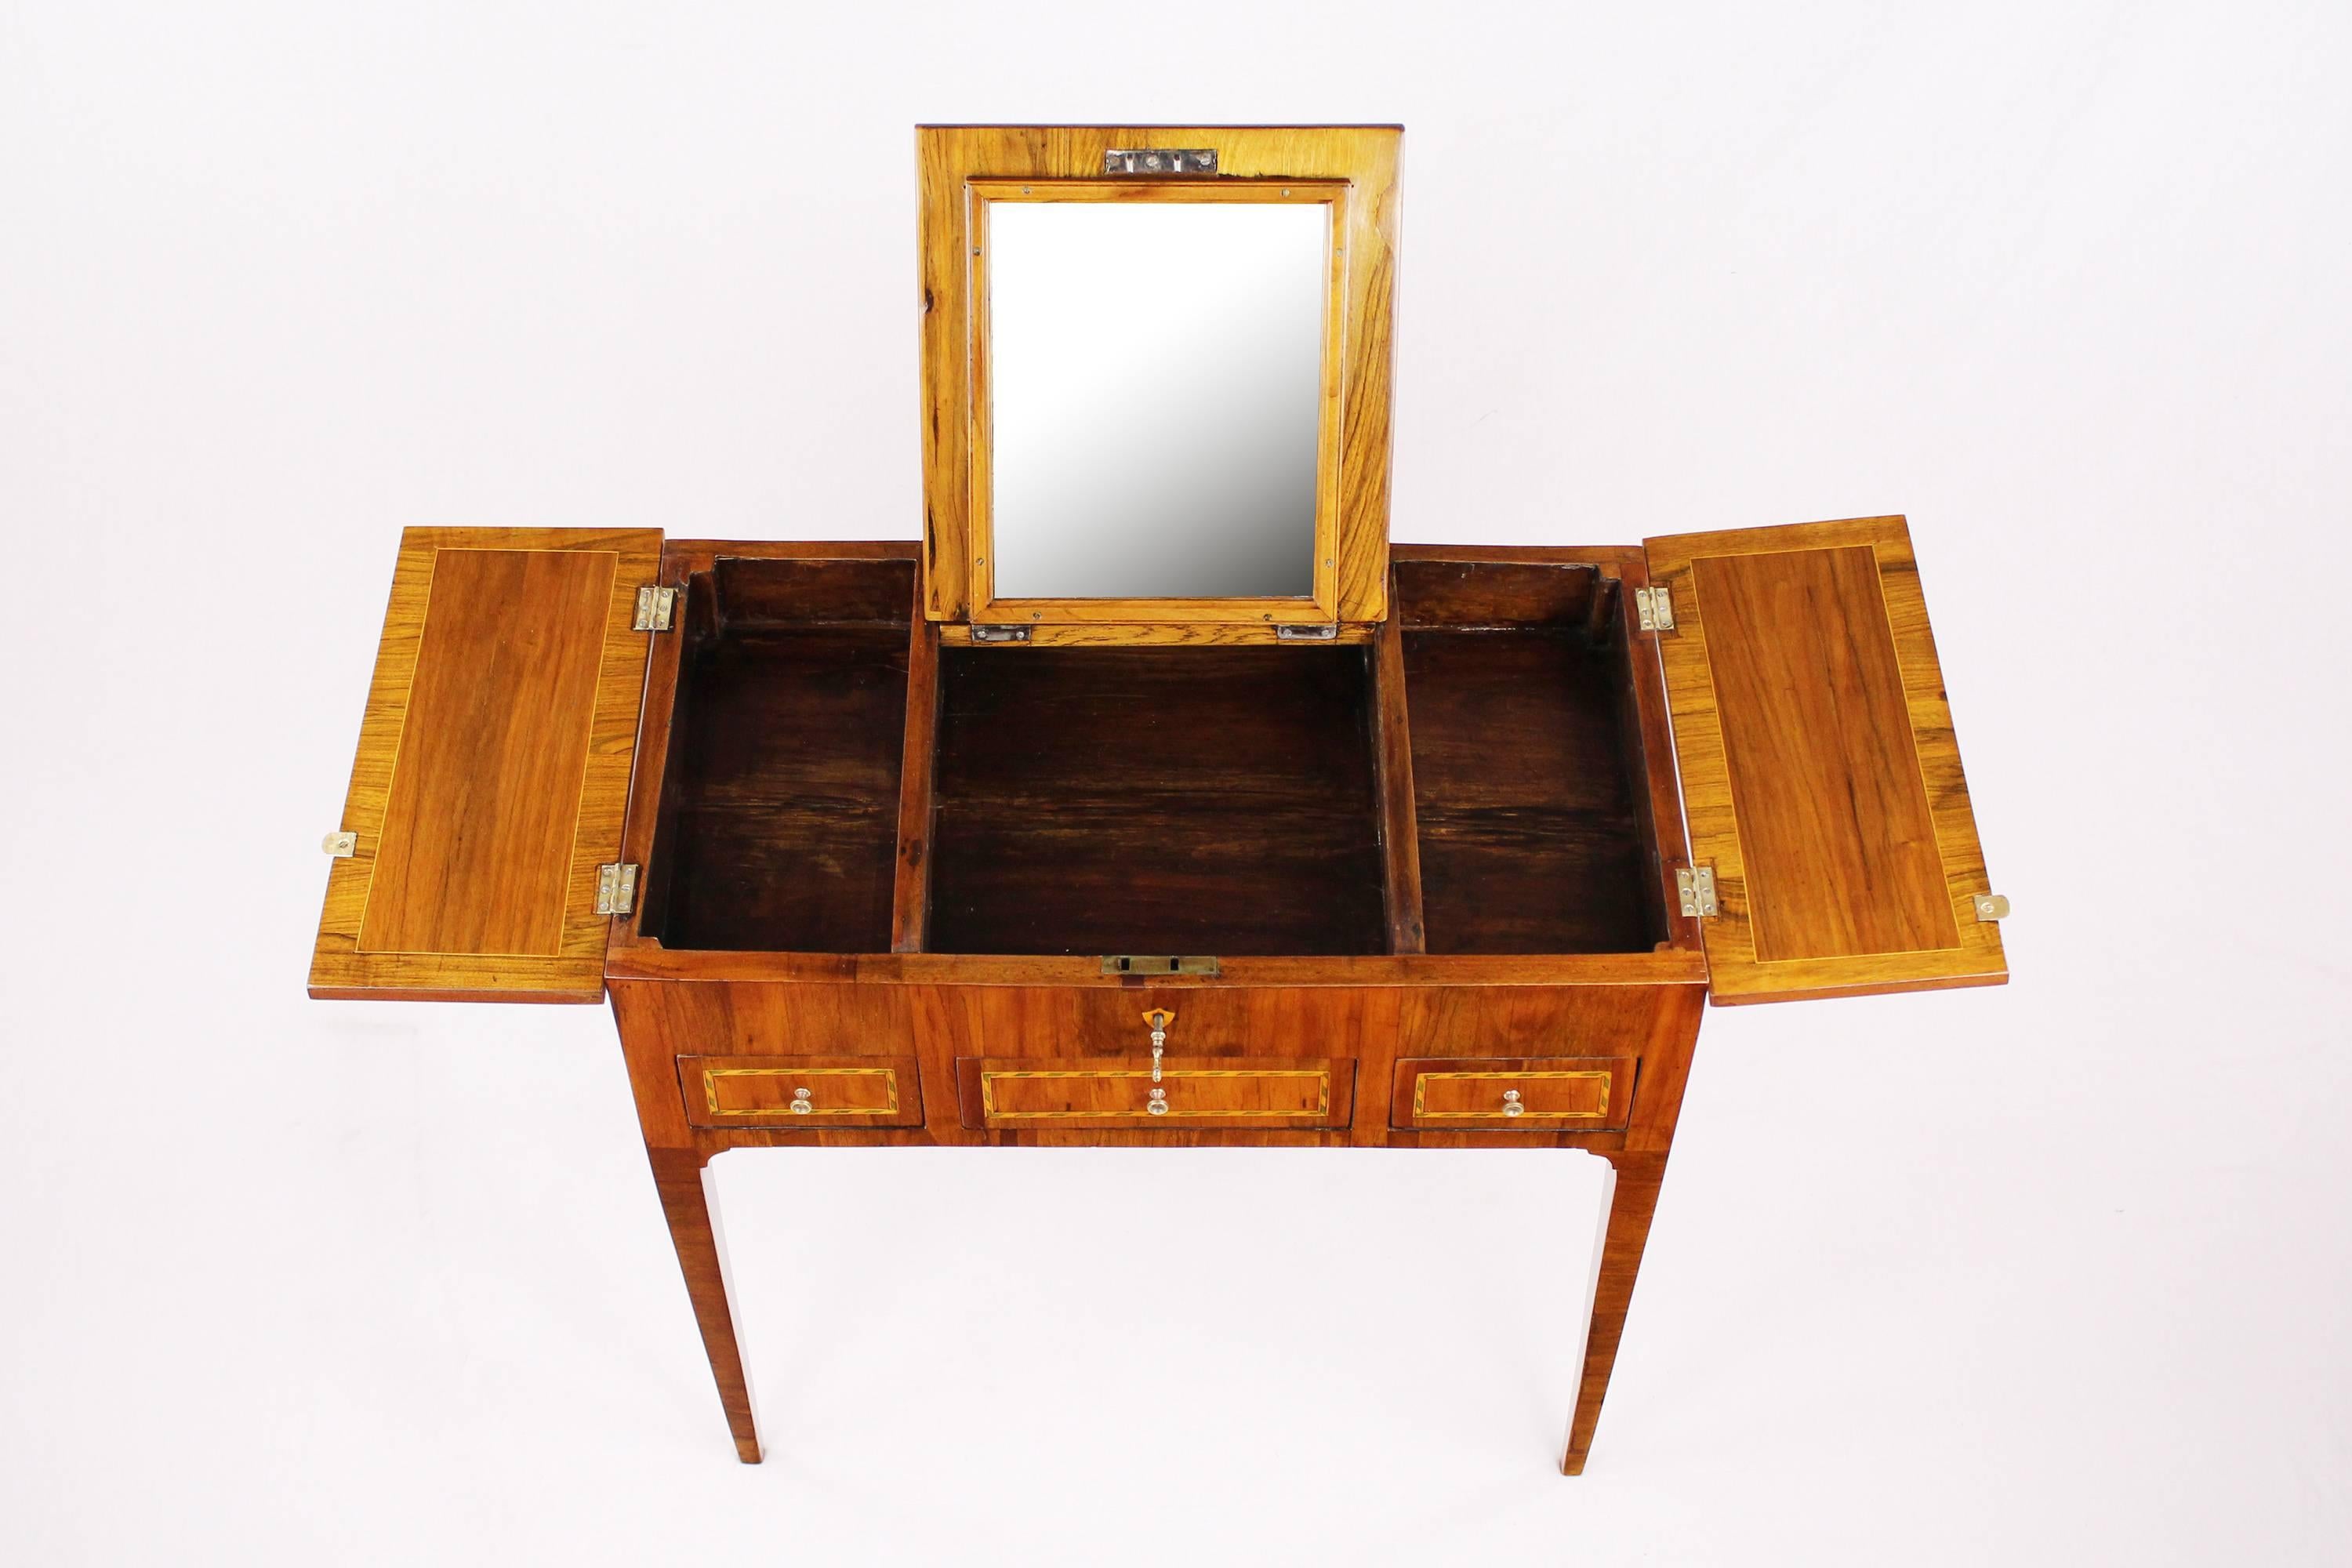 Biedermeier Early 19th Century Dressing Table, Poudreuse, Mahogany Veneered, Marquetry Works